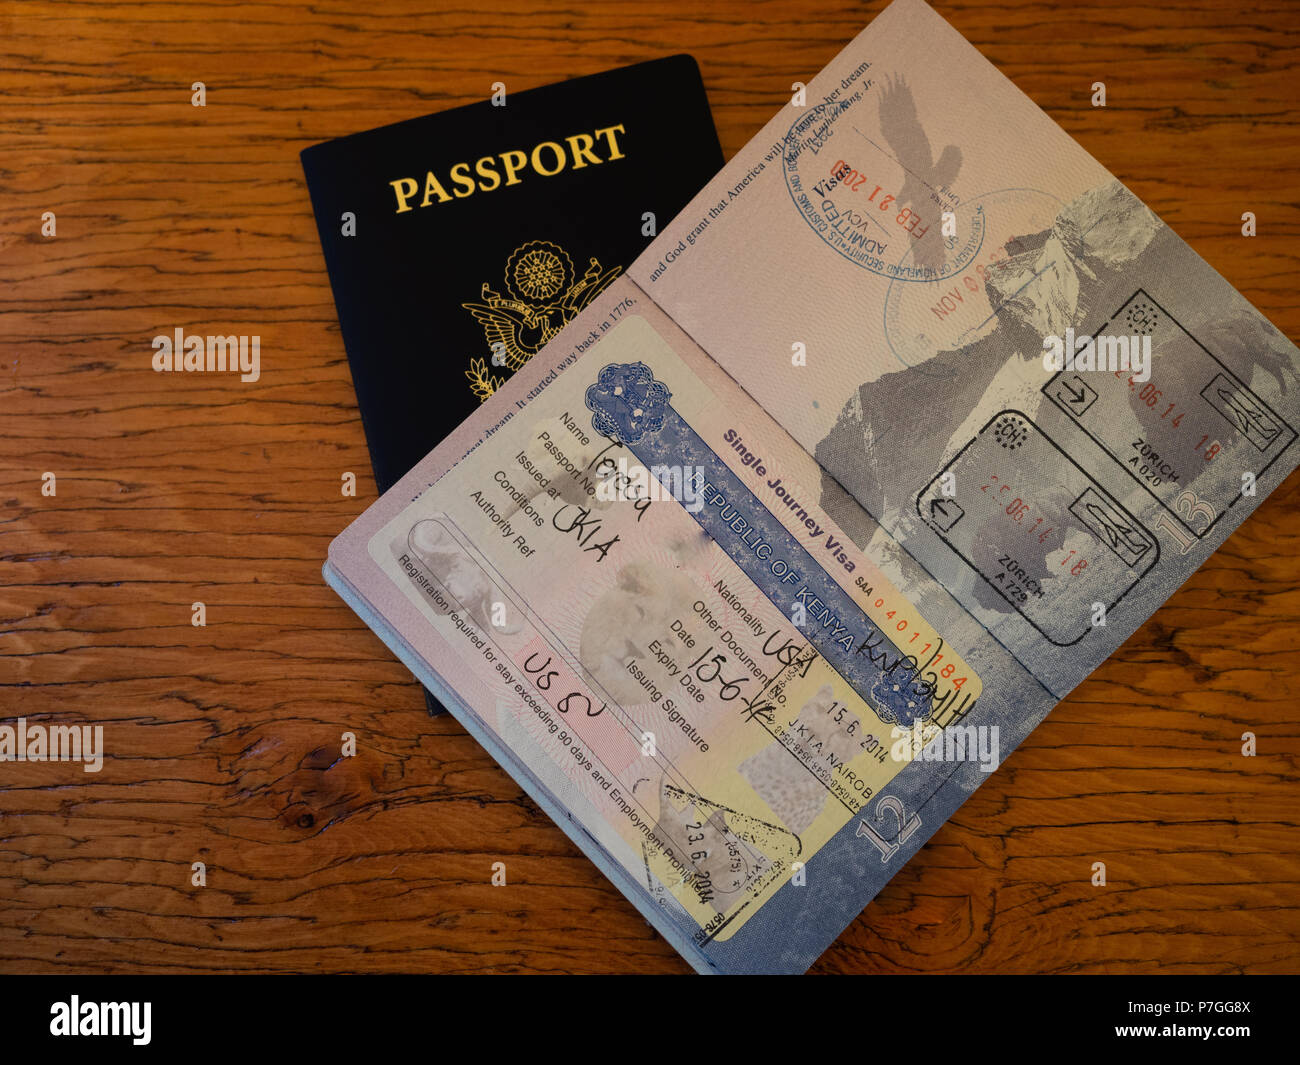 An open US passport showing stamps from Kenya and the Visa required for entry. Photographed on a wooden table. Stock Photo